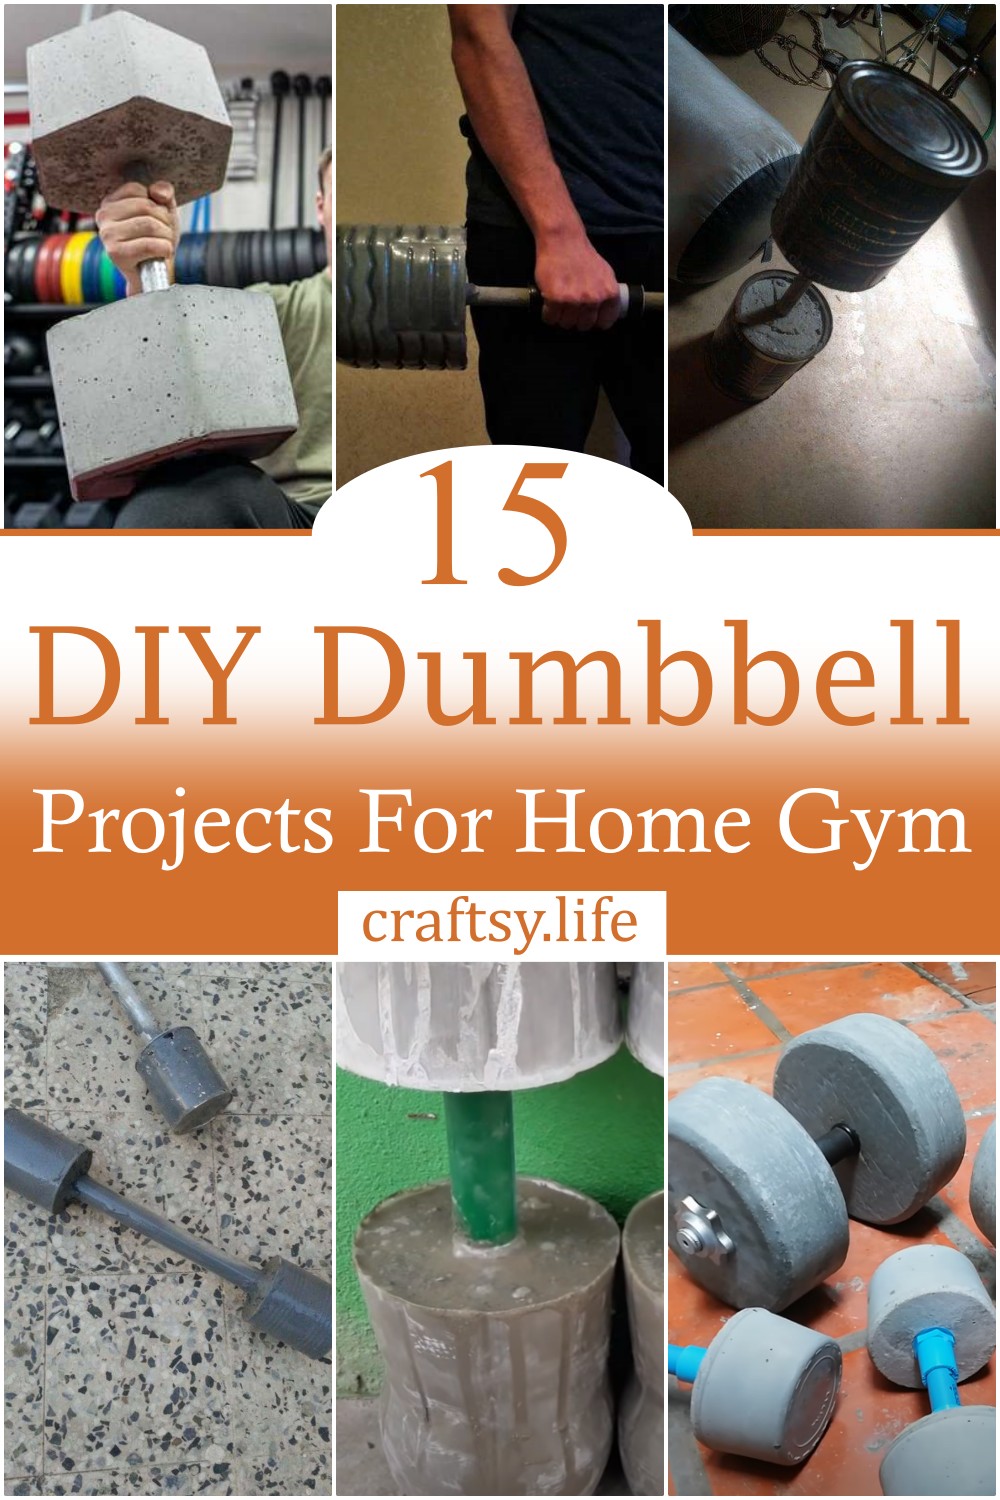 DIY Dumbbell Projects